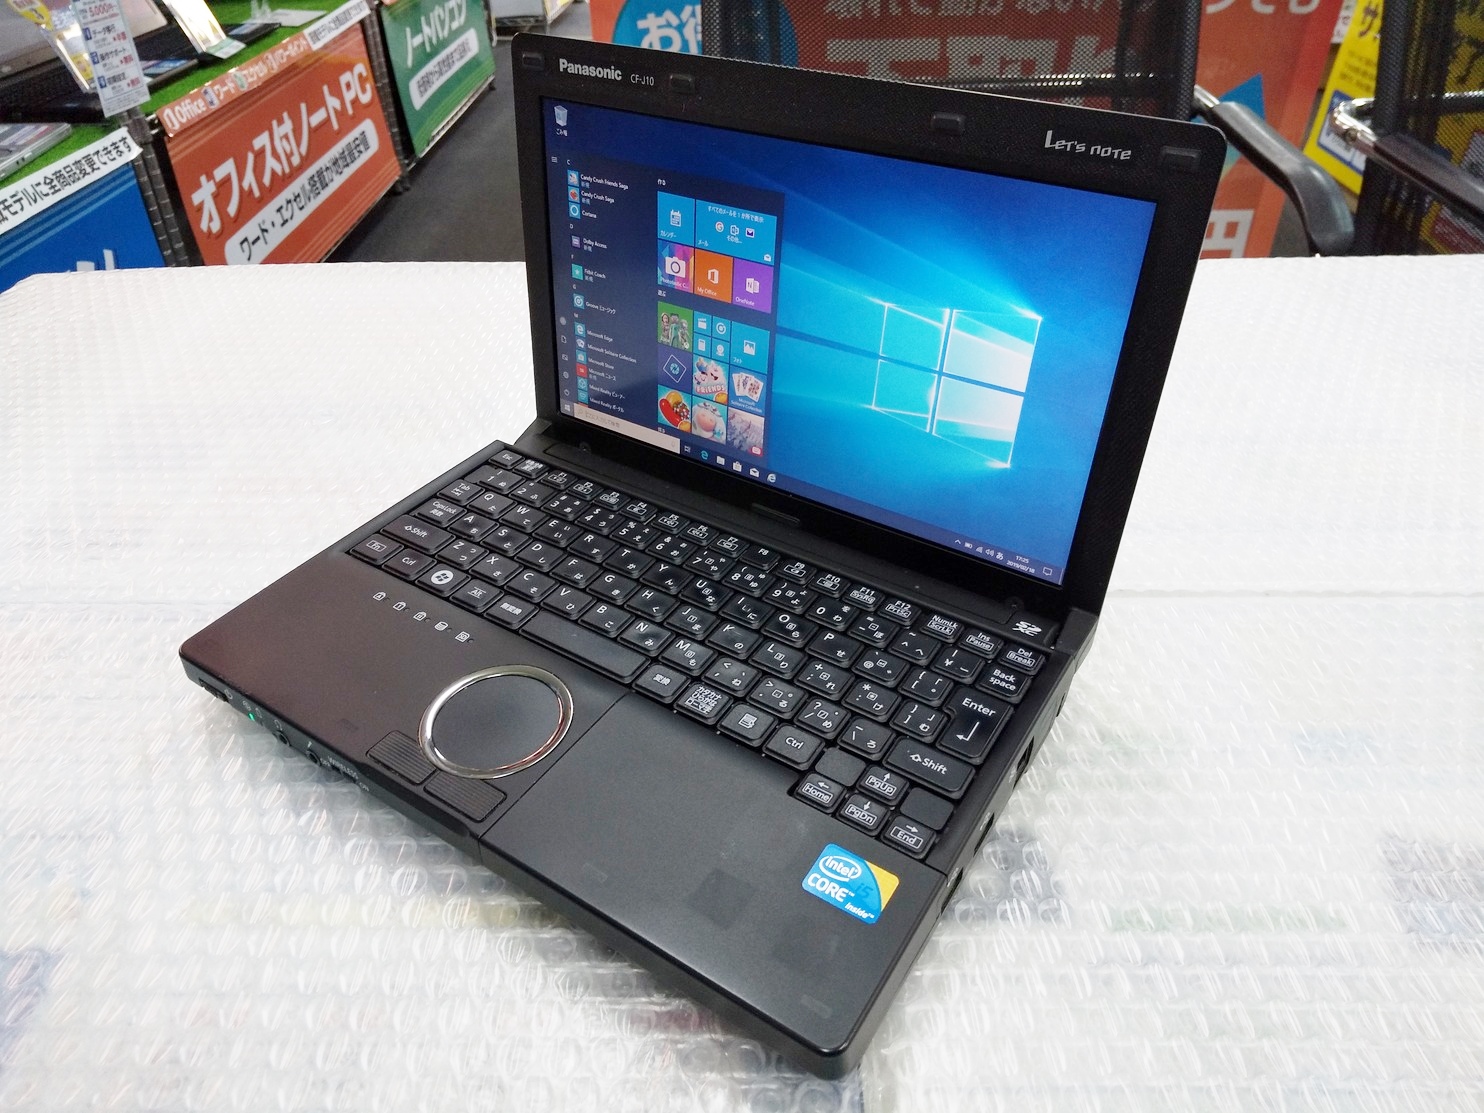 Panasonic Let’s note CF-J10 (Core i5 2.67GHz/4GB/SSD120GB) 中古ノートパソコンが激安